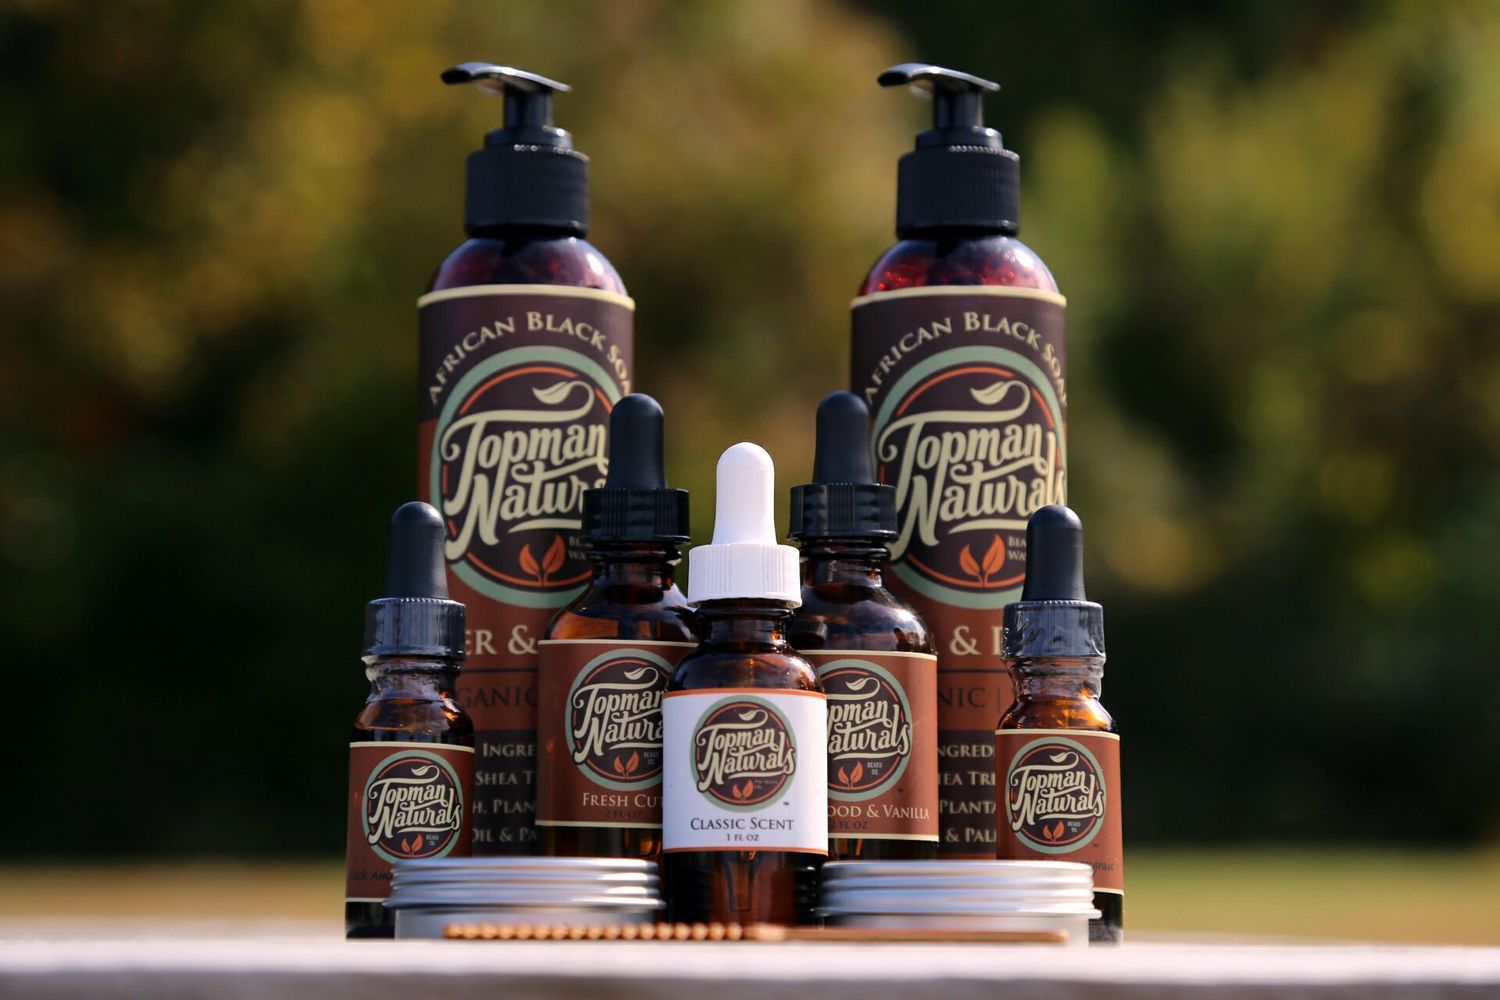 Natural Beard care products